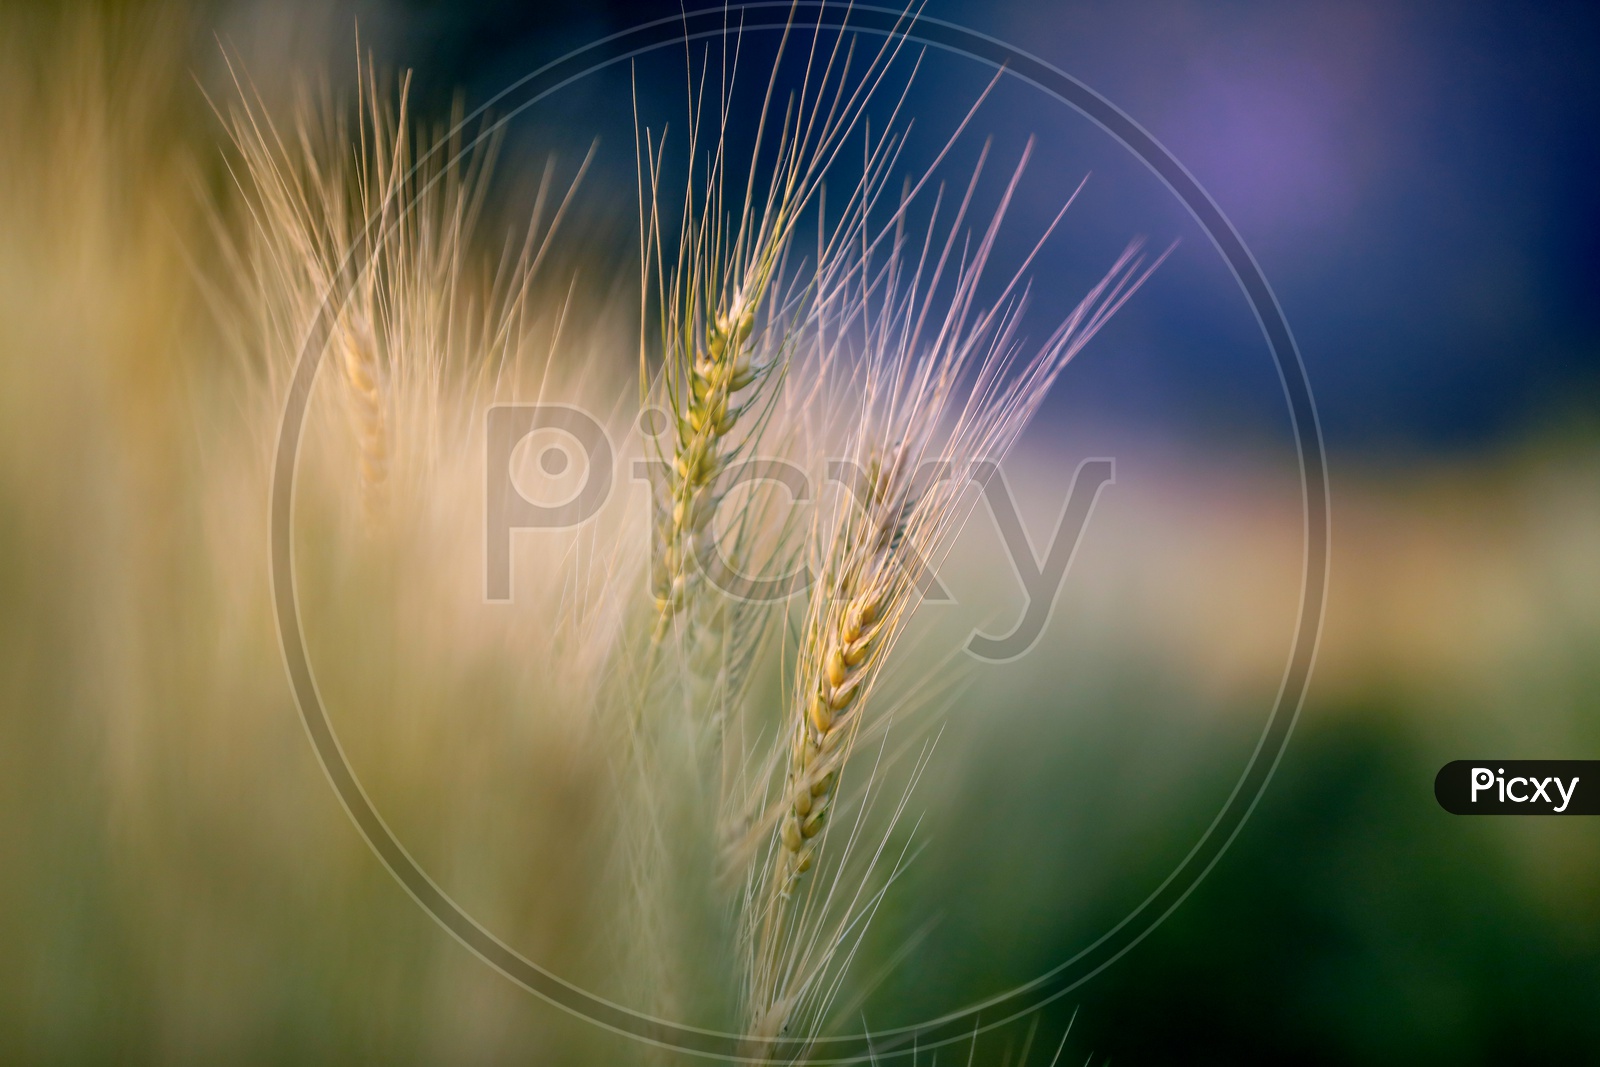 Young Green Wheat Ears Or Spikelets in a Wheat Fields Closeup